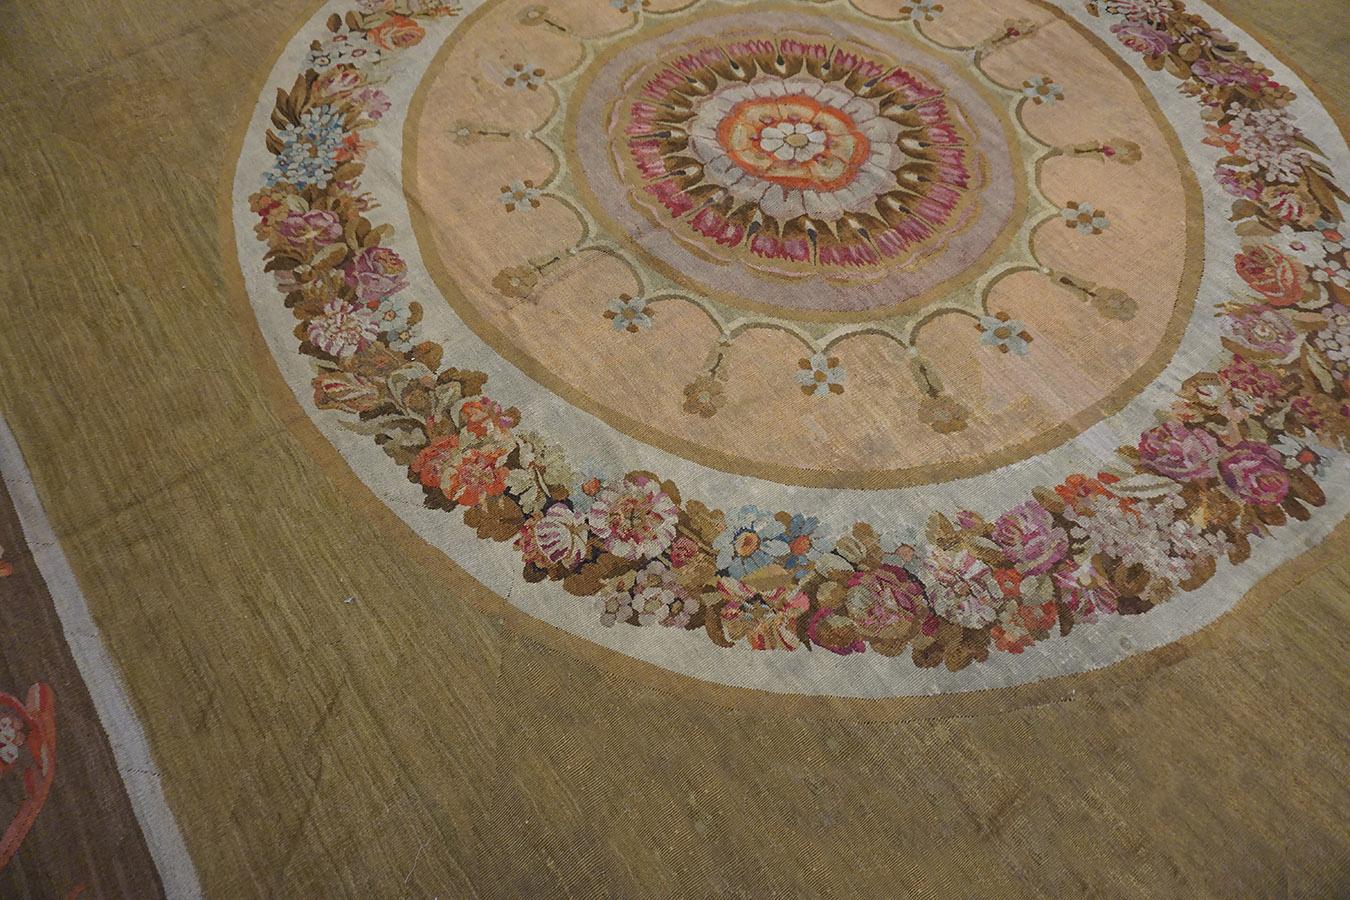 Early 19th Century French Empire Period Aubusson Carpet (13'8